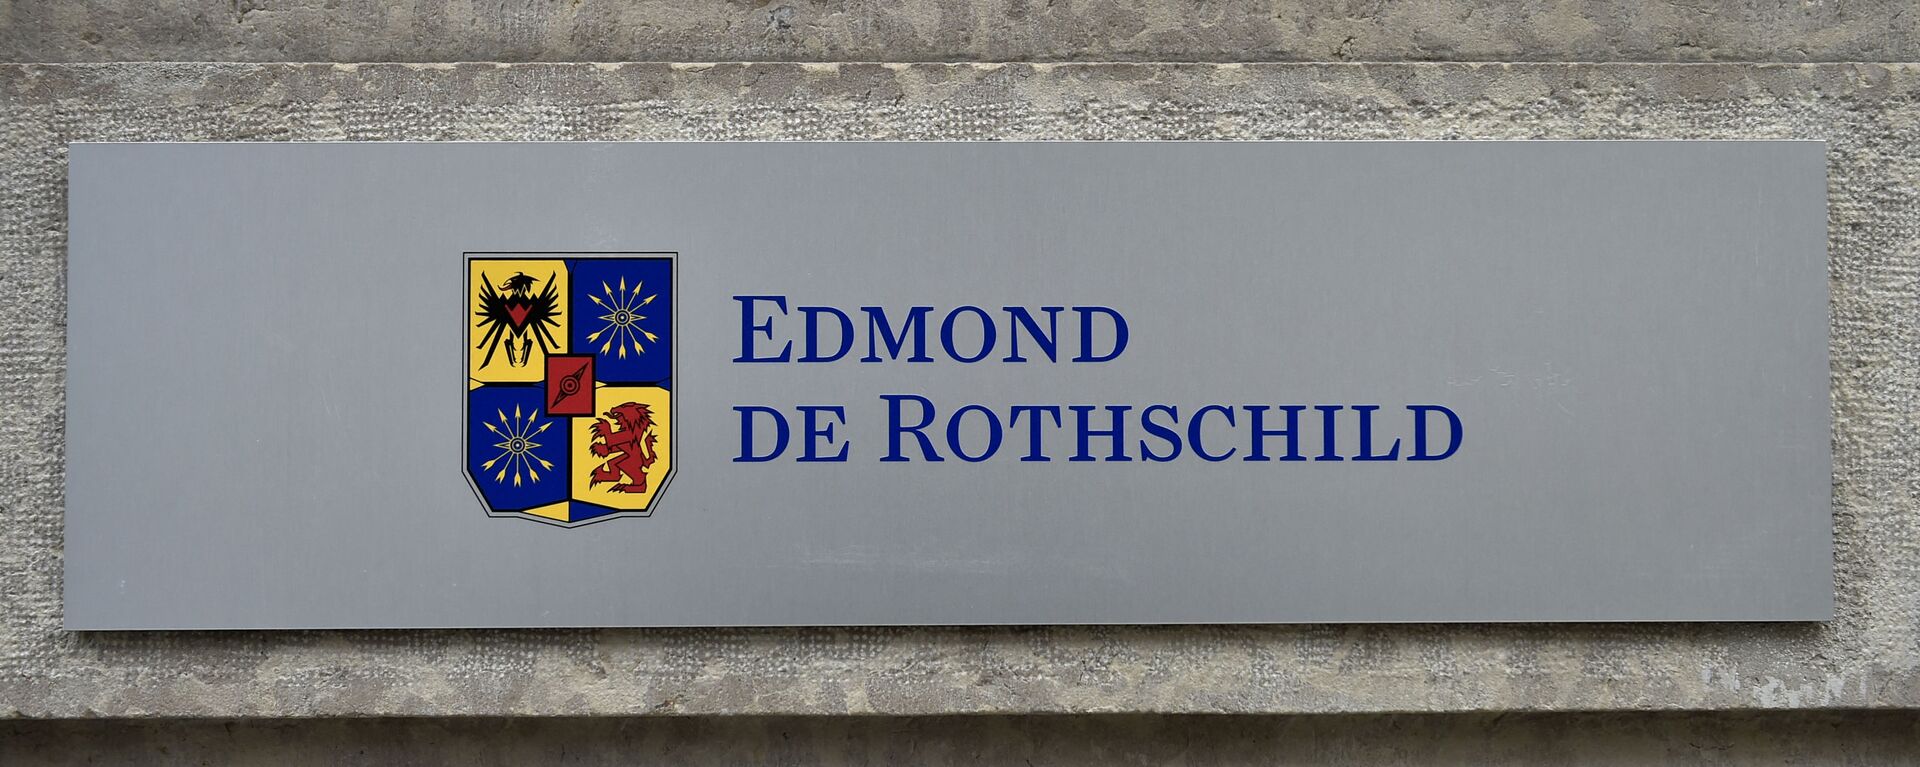 This picture taken on March 8, 2016, shows a sign of the Swiss private banking Edmond de Rothschild at its headquarters on March 8, 2016 in Geneva. - The bank revealed on March 4, 2016, that it had been placed under investigation in France about a case managed by a former executive and now closed. (Photo by FABRICE COFFRINI / AFP) - Sputnik International, 1920, 19.05.2021